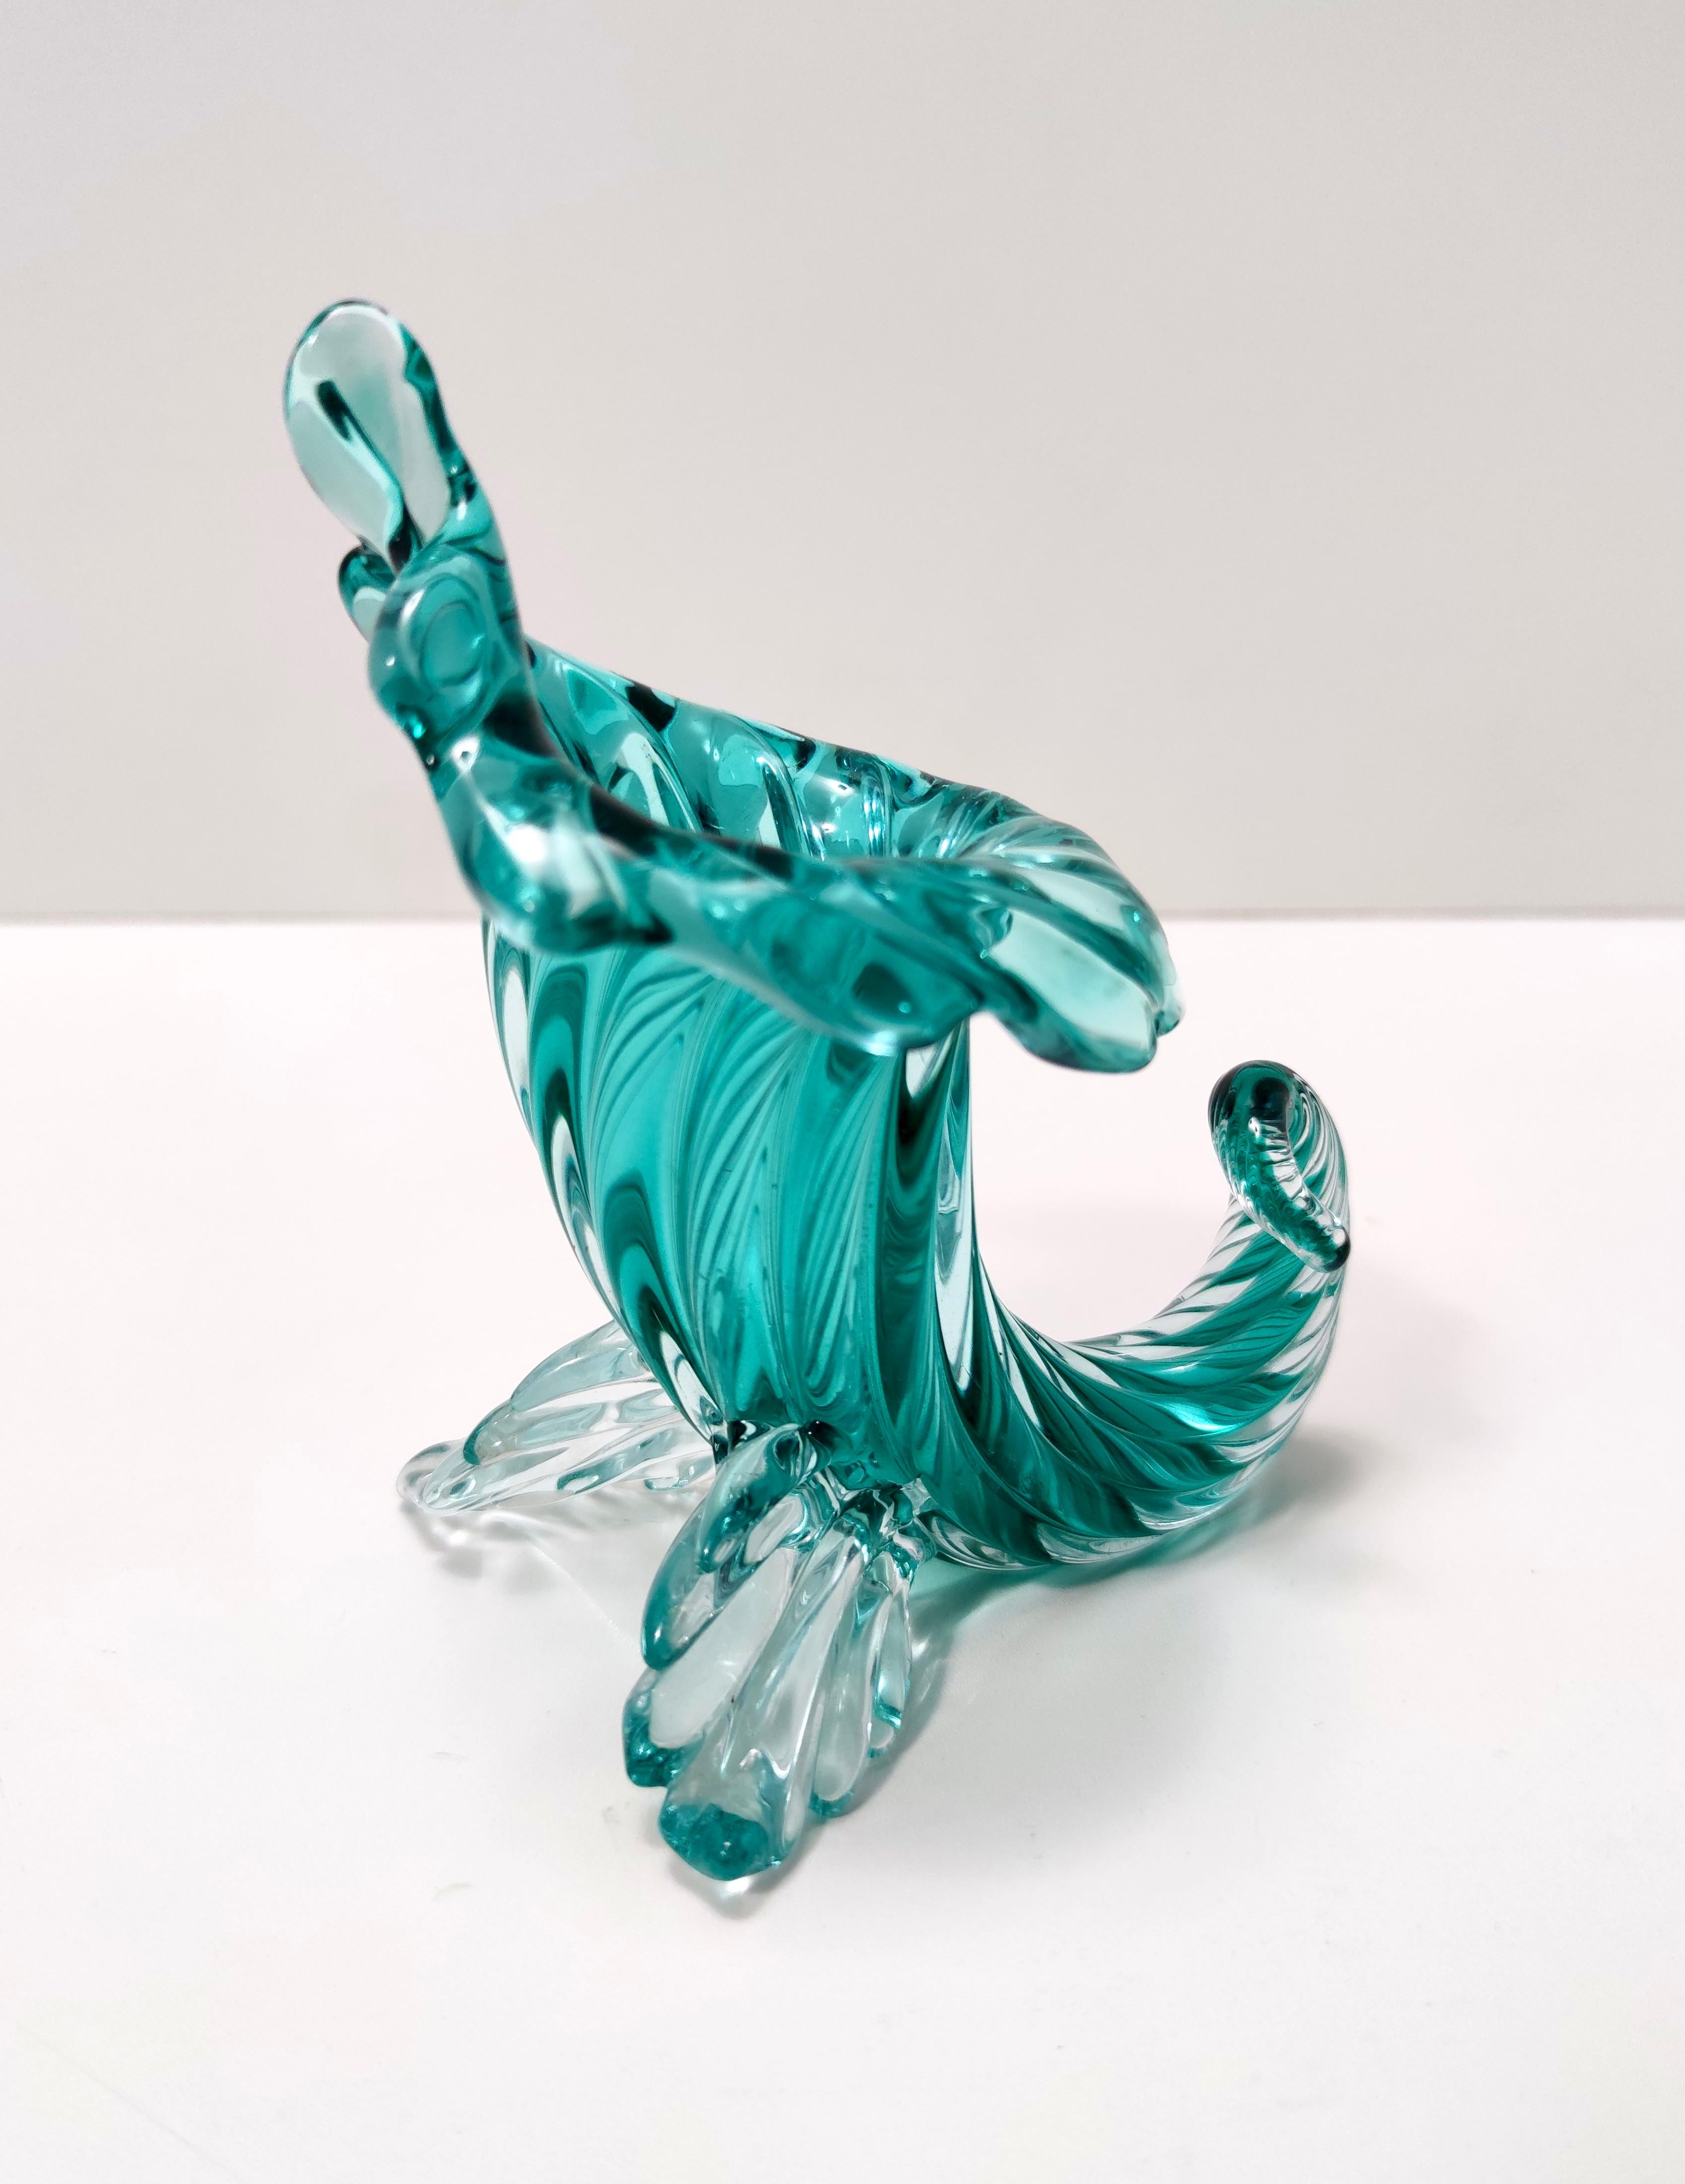 Vintage Teal Murano Glass Cornucopia Vase by Archimede Seguso, Italy For Sale 4